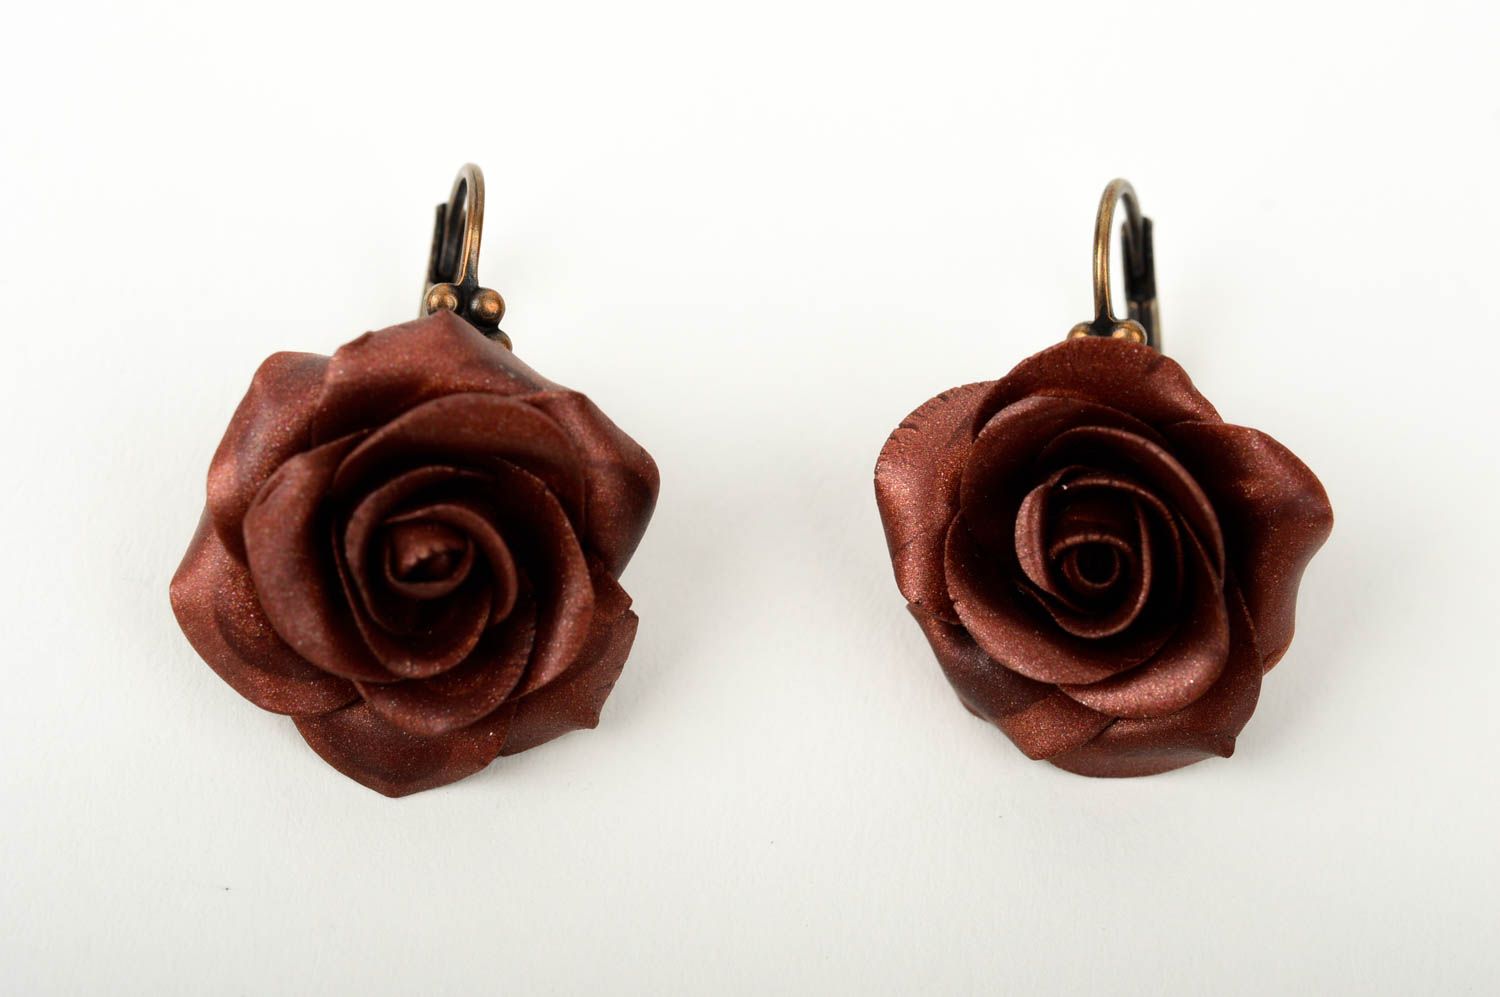 Plastic rose earrings handmade polymer clay earrings with charms stylish jewelry photo 1